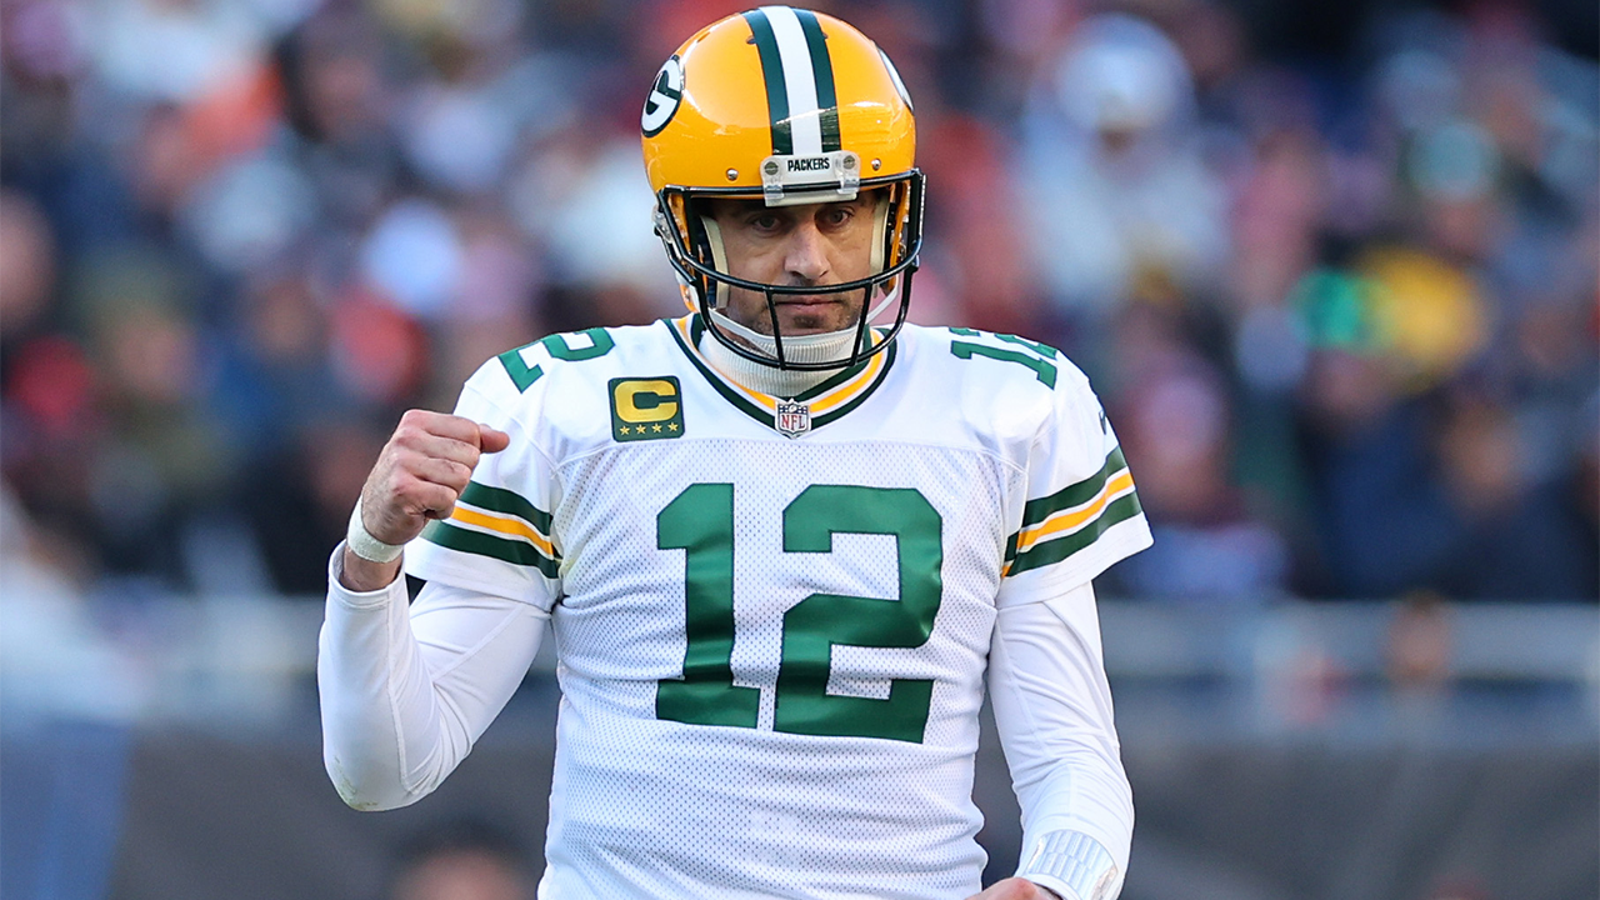 Adam Amin and Mark Schlereth discussed the comeback victory for Aaron Rodgers and the Green Bay Packers over their NFC North Rival Chicago Bears.